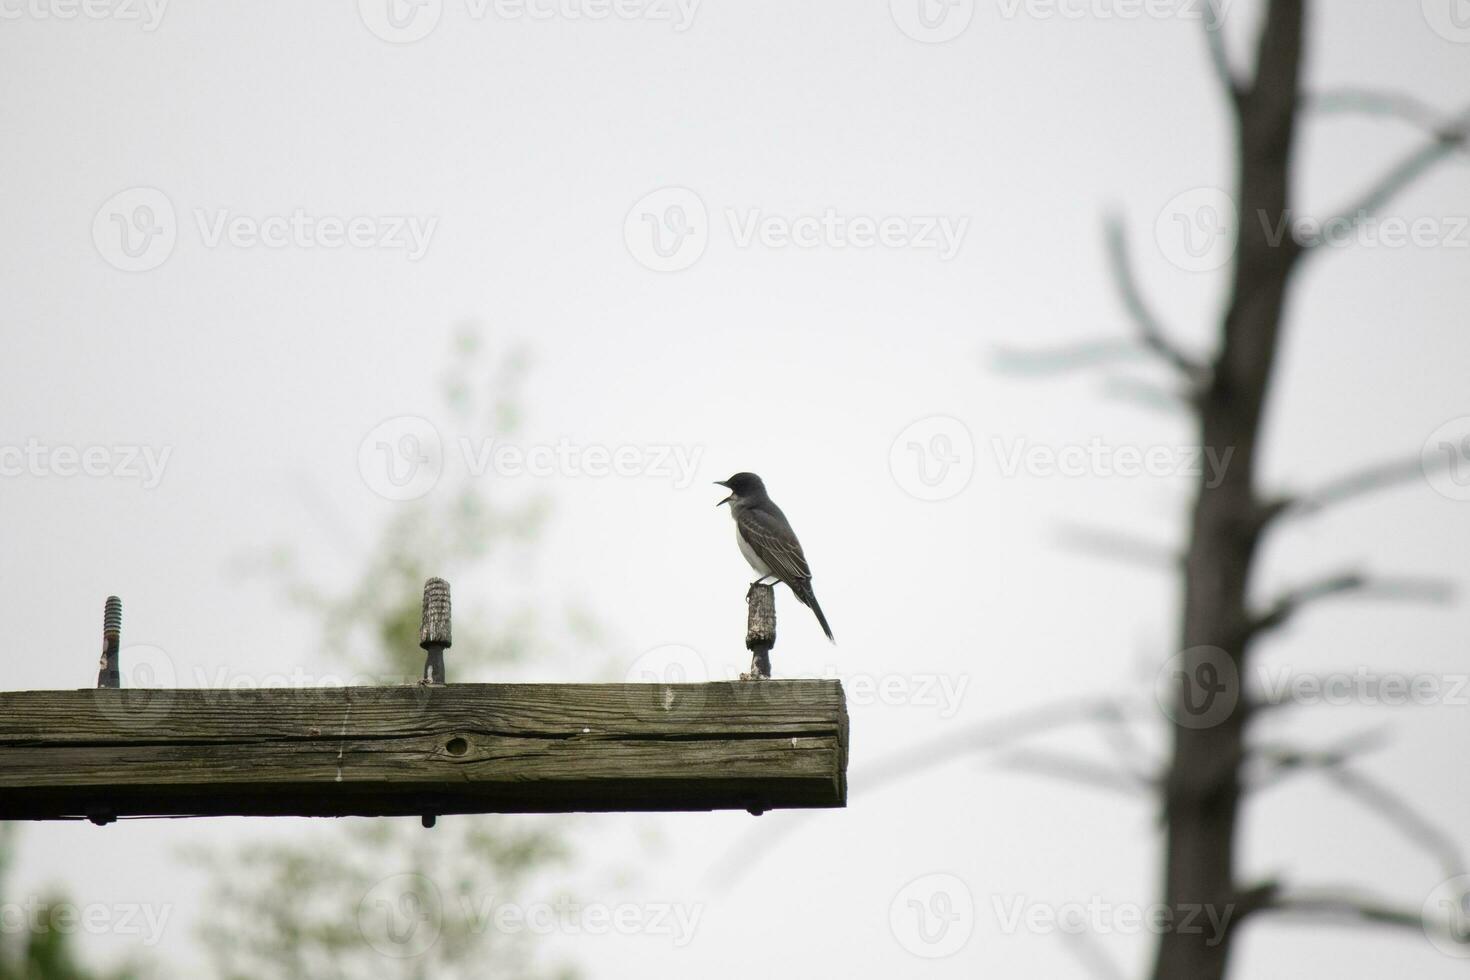 This eastern kingbird was perched on top of this post. They are a species of tyrant flycatchers. His beak open. His grey feathers looking pretty against the shite belly. This seen against a white sky. photo